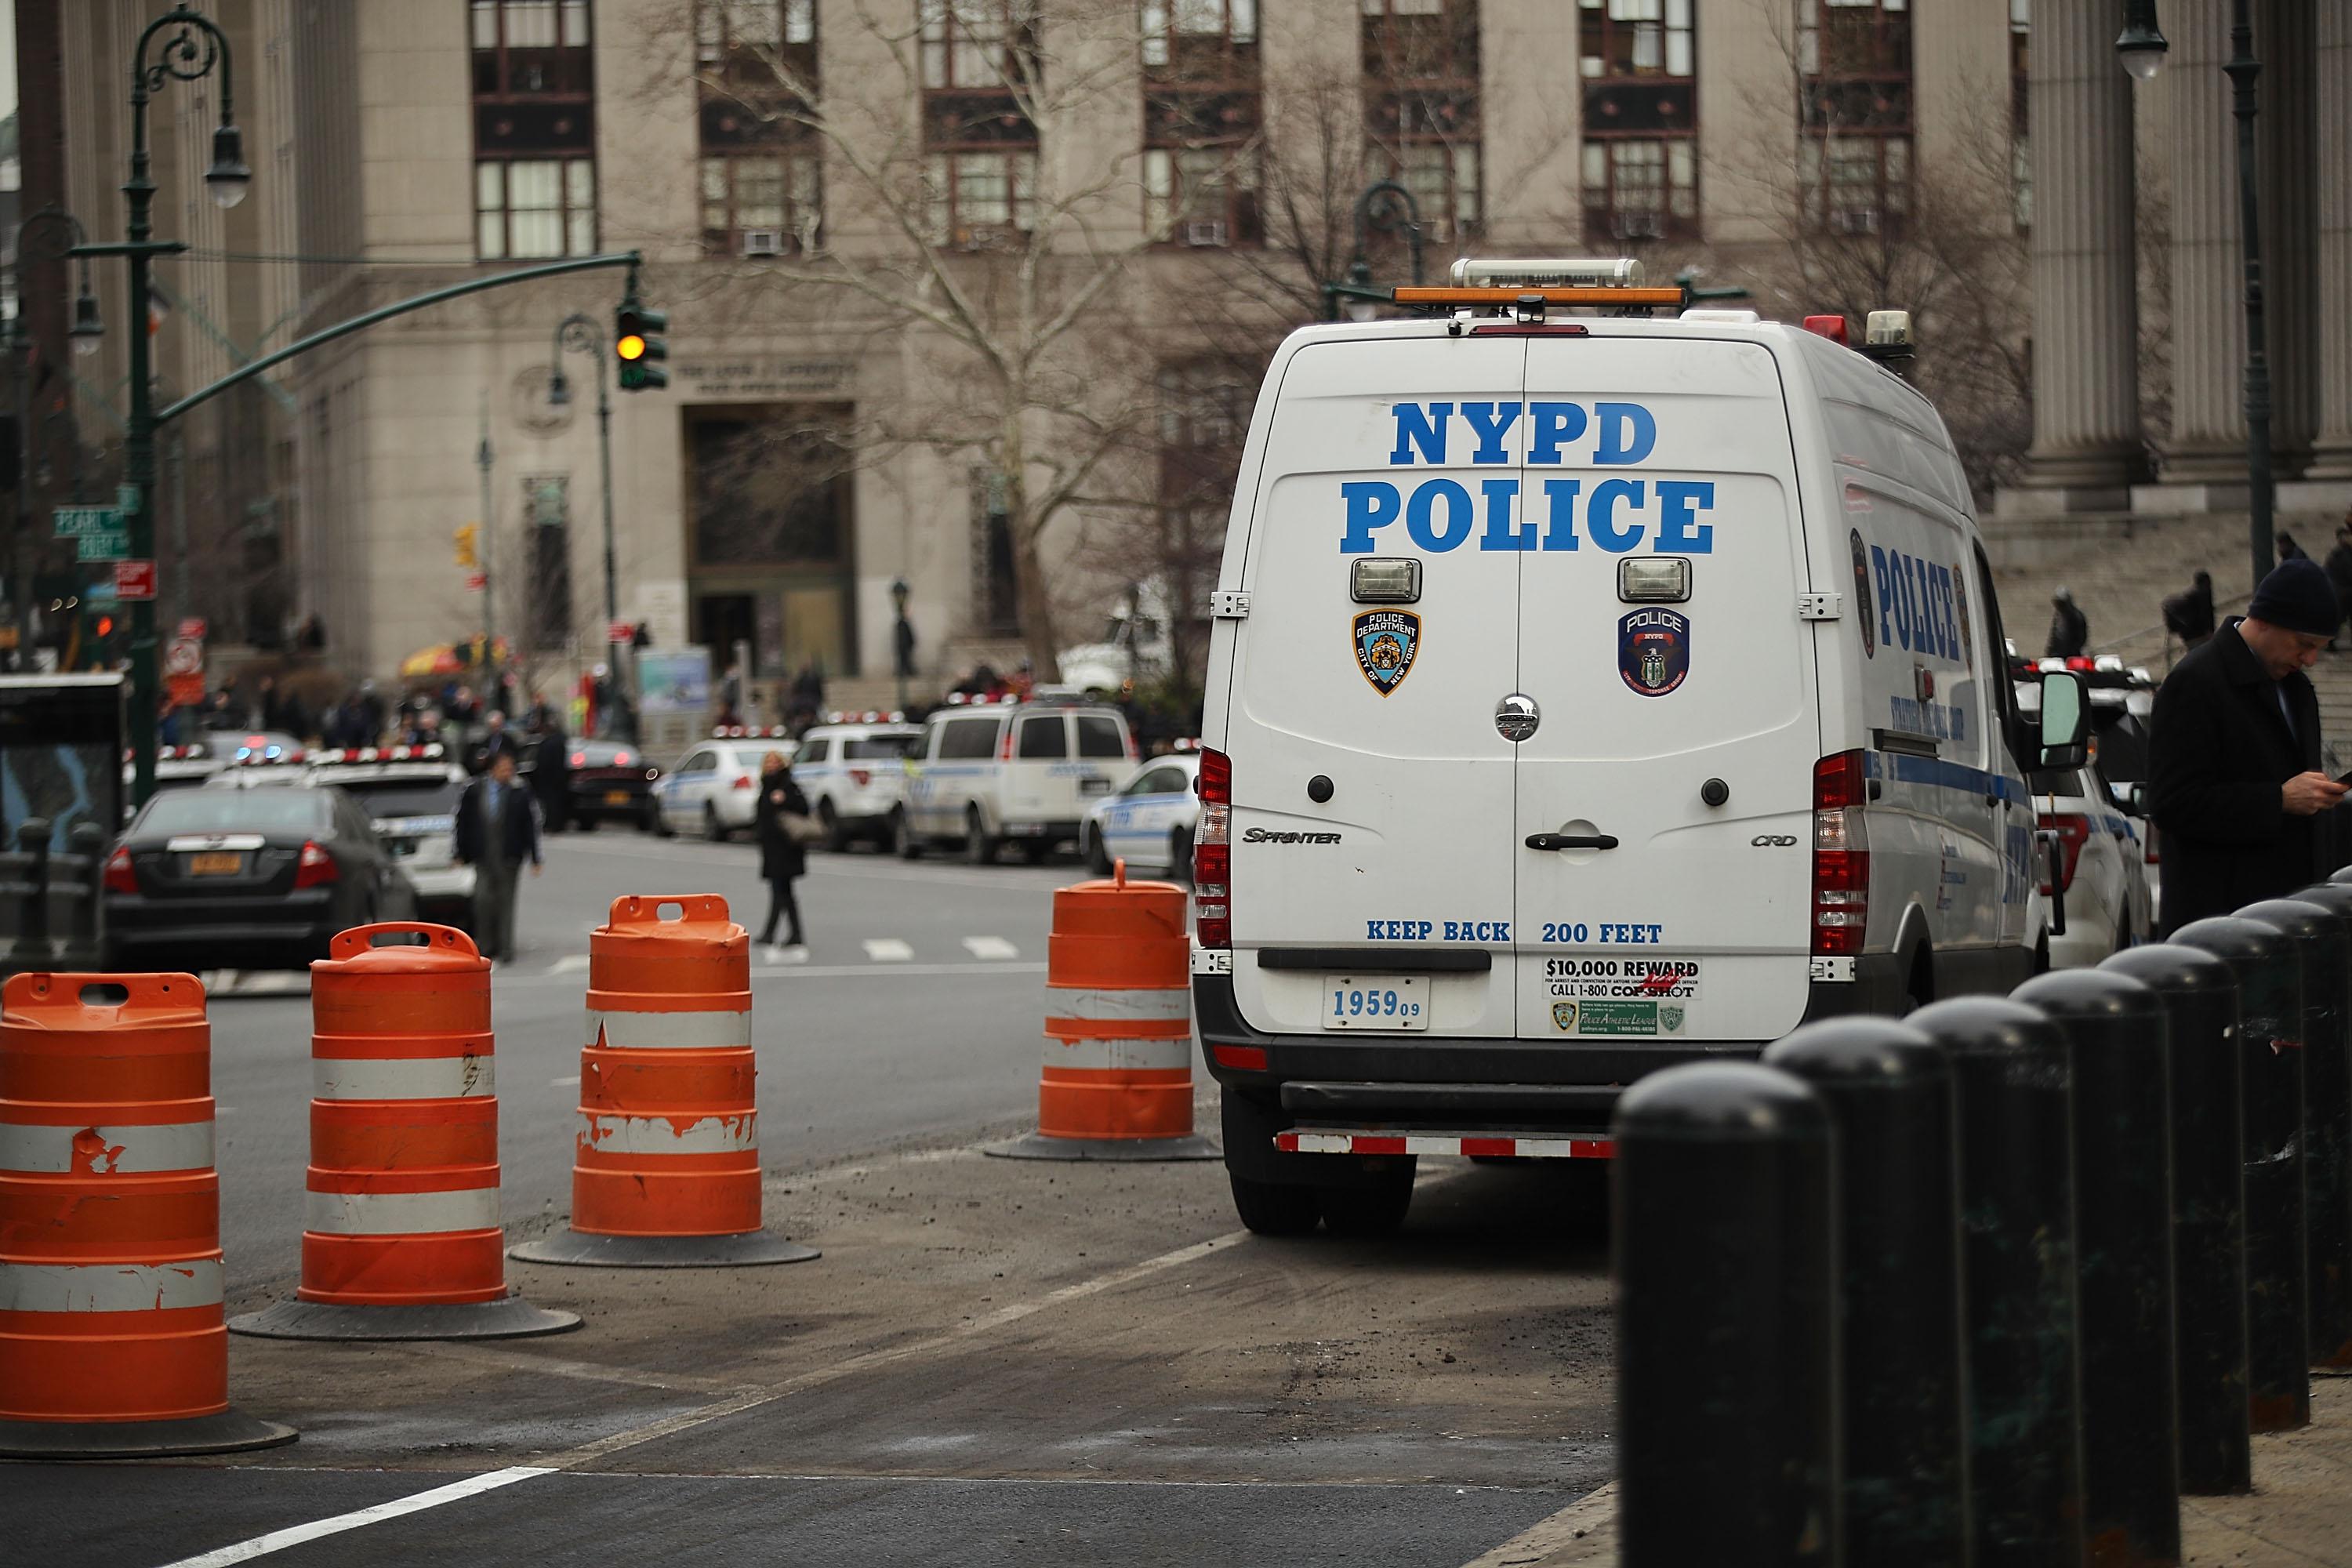 A NYPD police van in Manhattan.